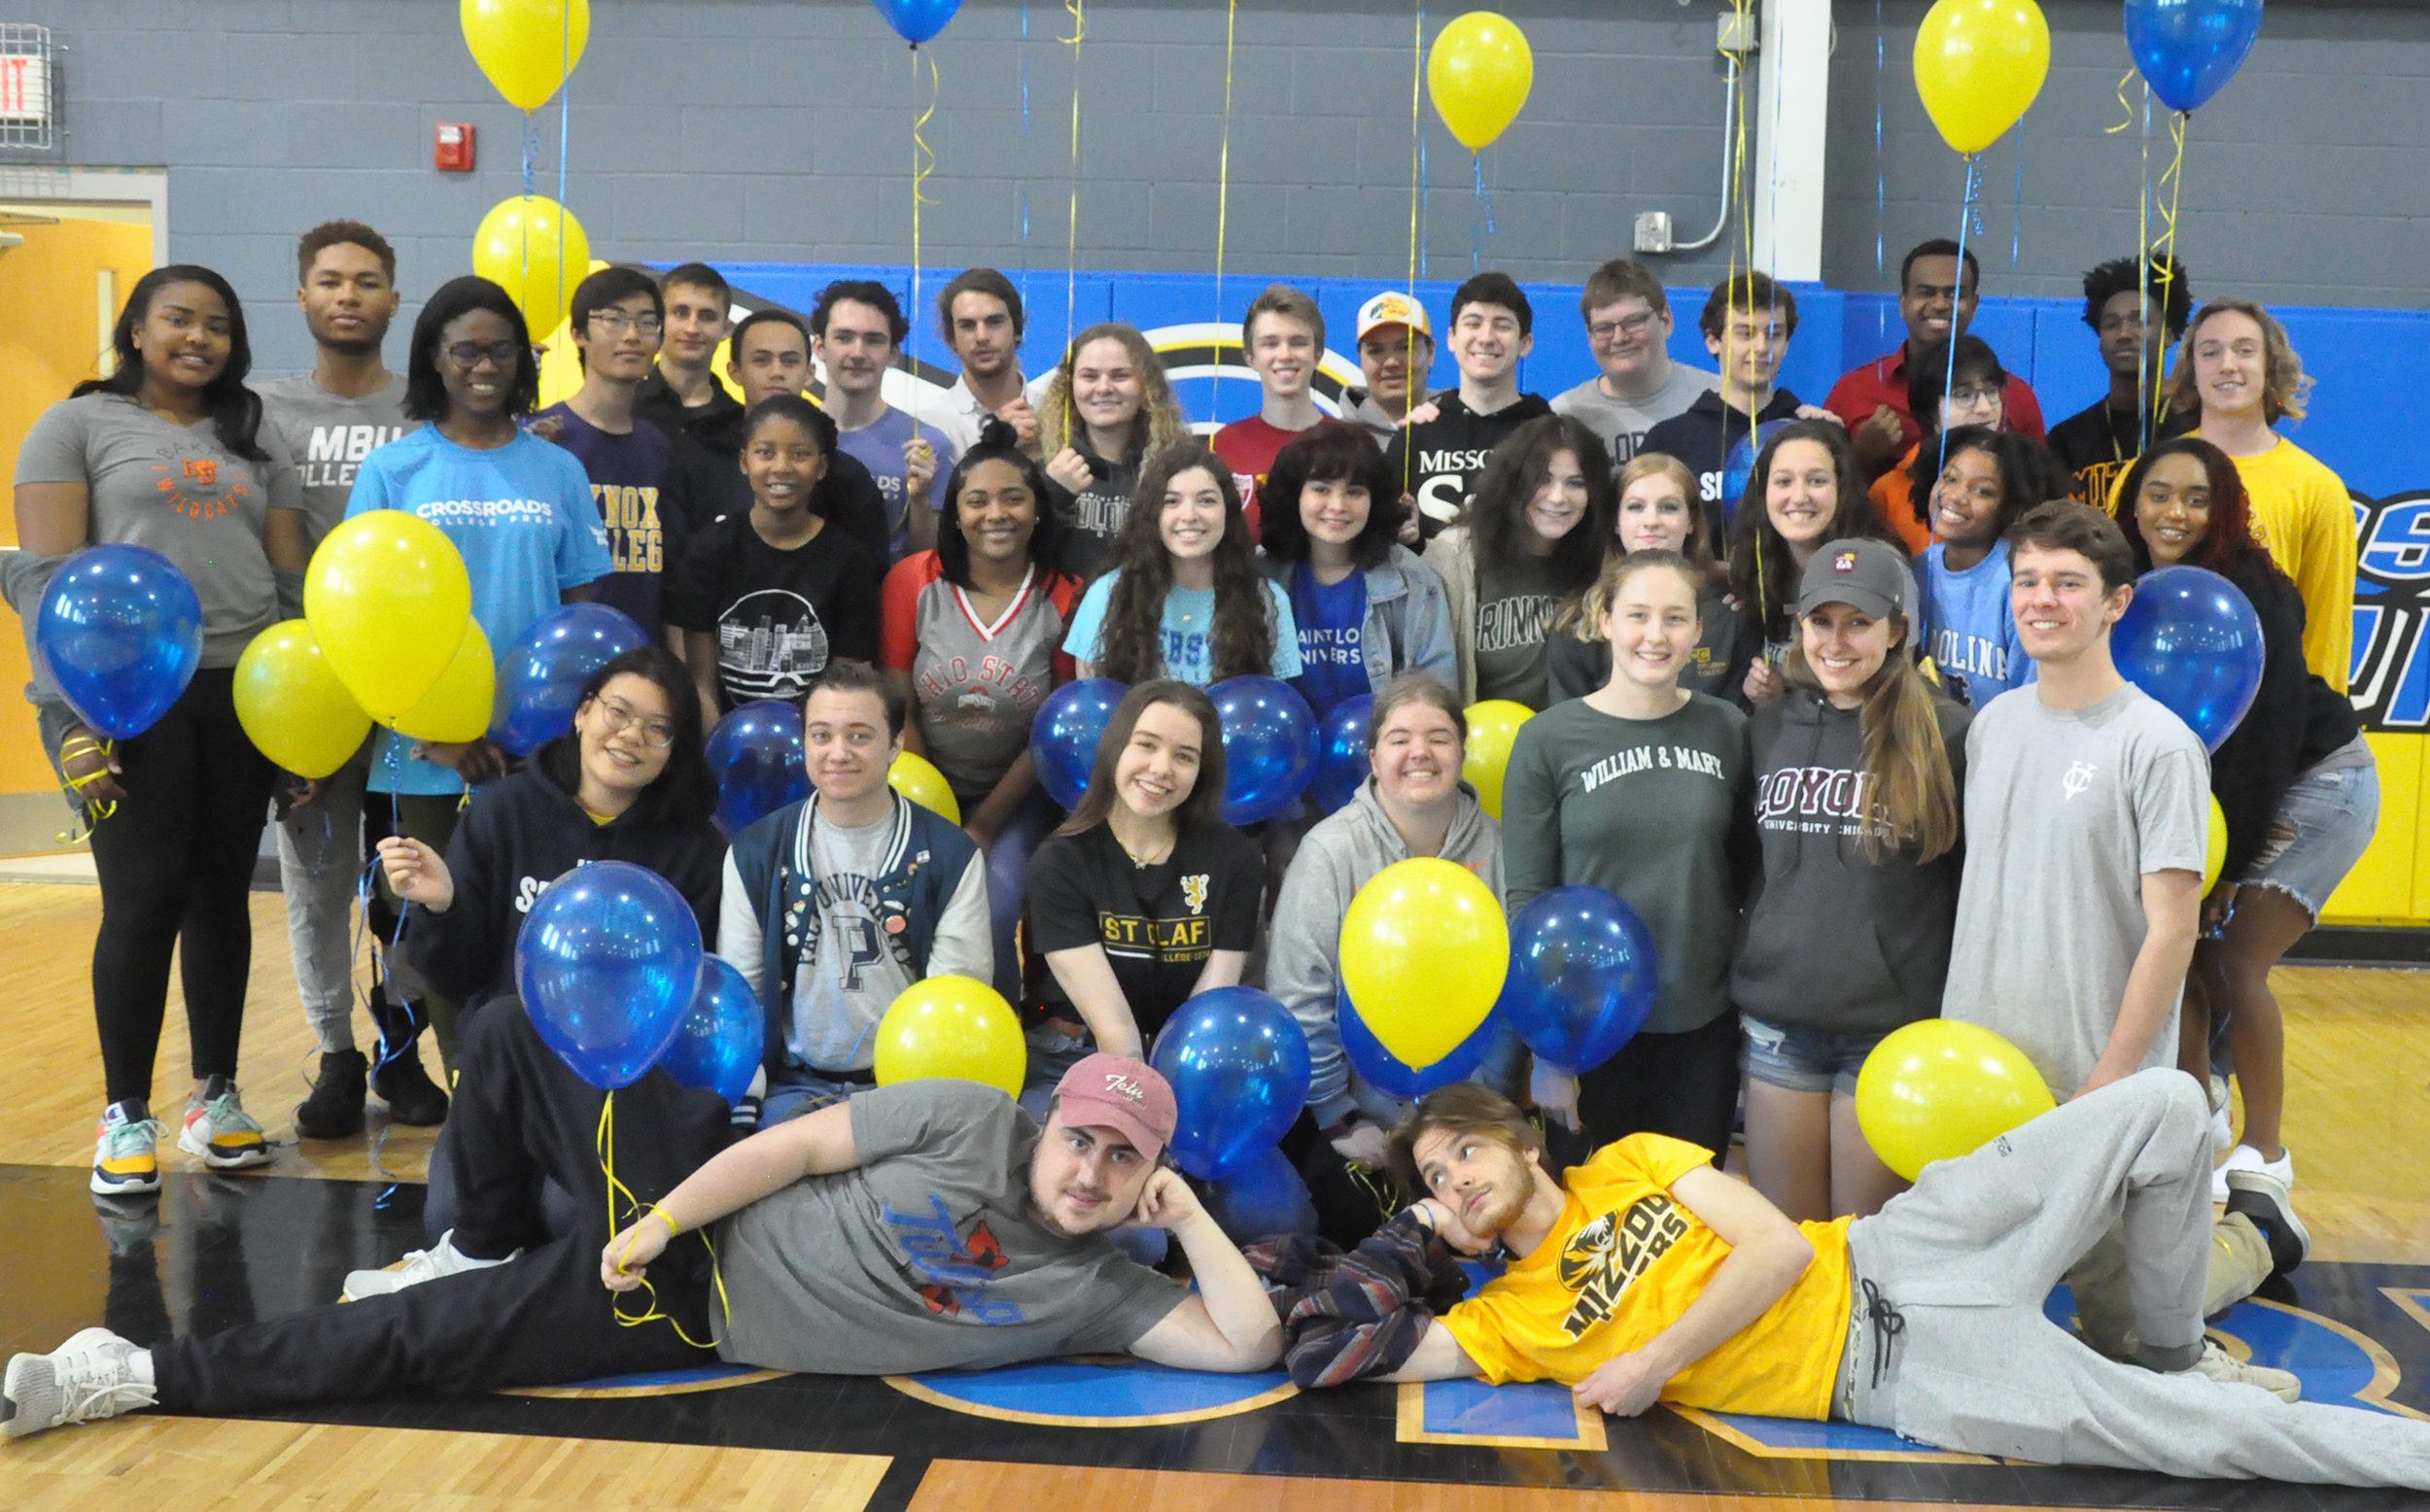 Balloon Day at Crossroads. Seniors wore shirts showing their colleges.